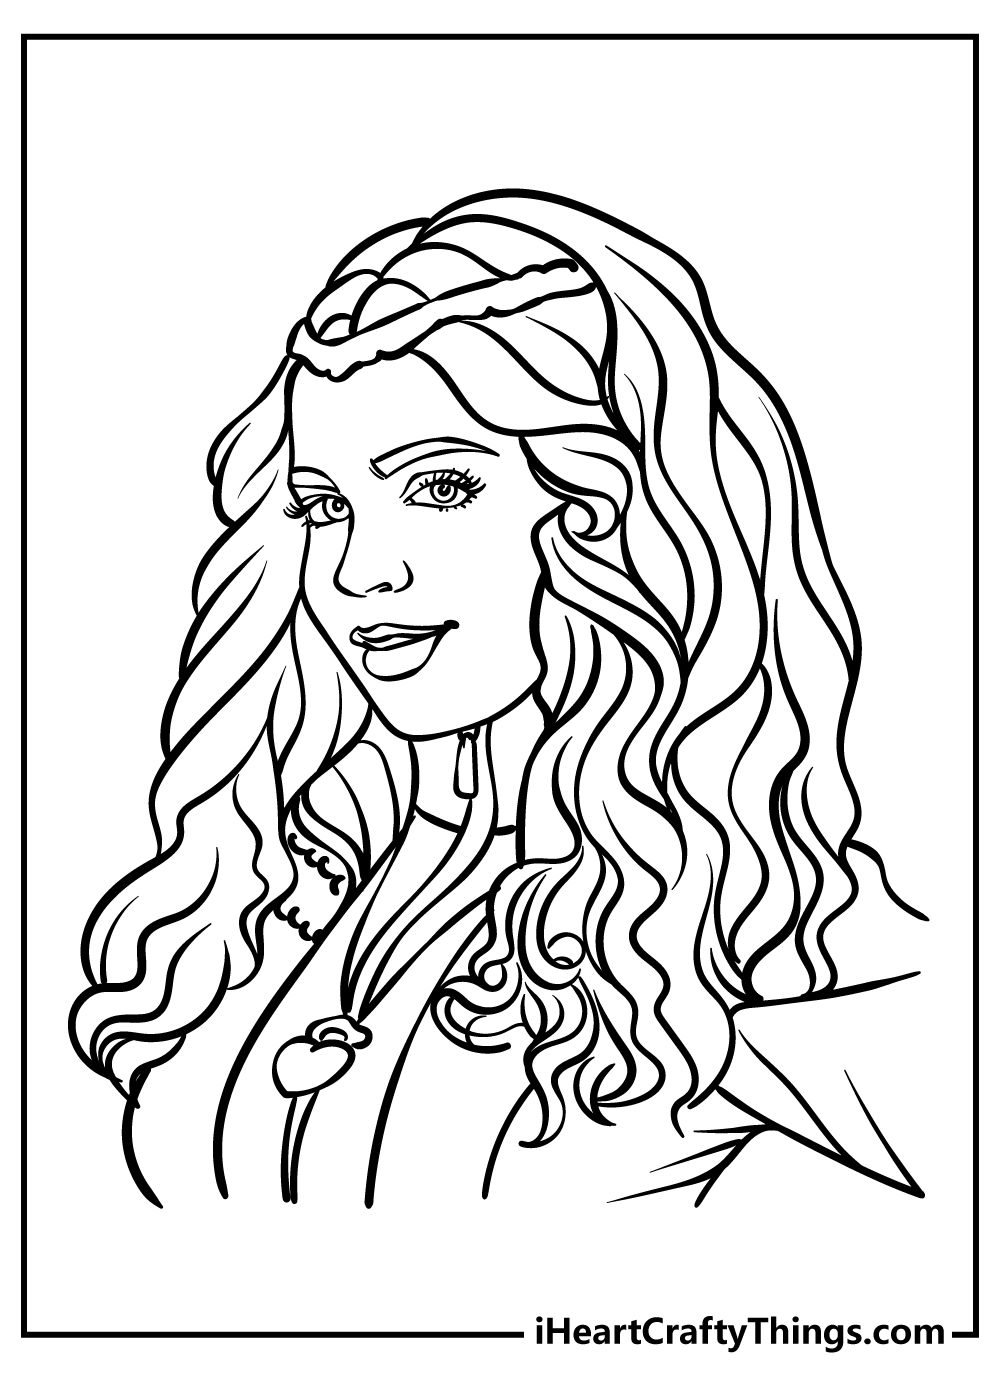 Descendants Coloring Pages for adults free printable